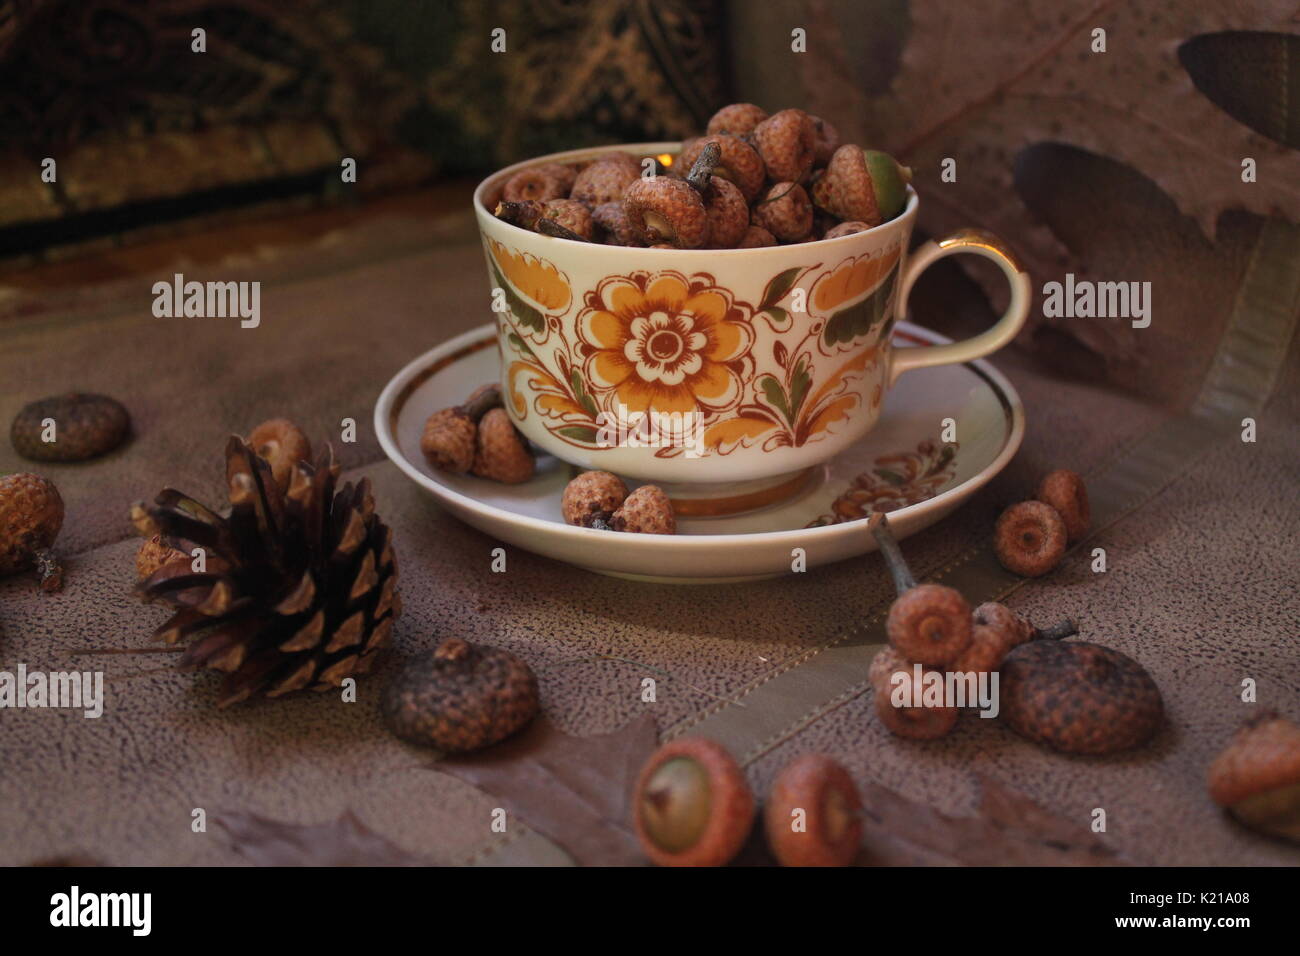 retro style tea set full oak acorns decorated with dry brown leaves and flowers, fir cones and juicy pink apples Stock Photo